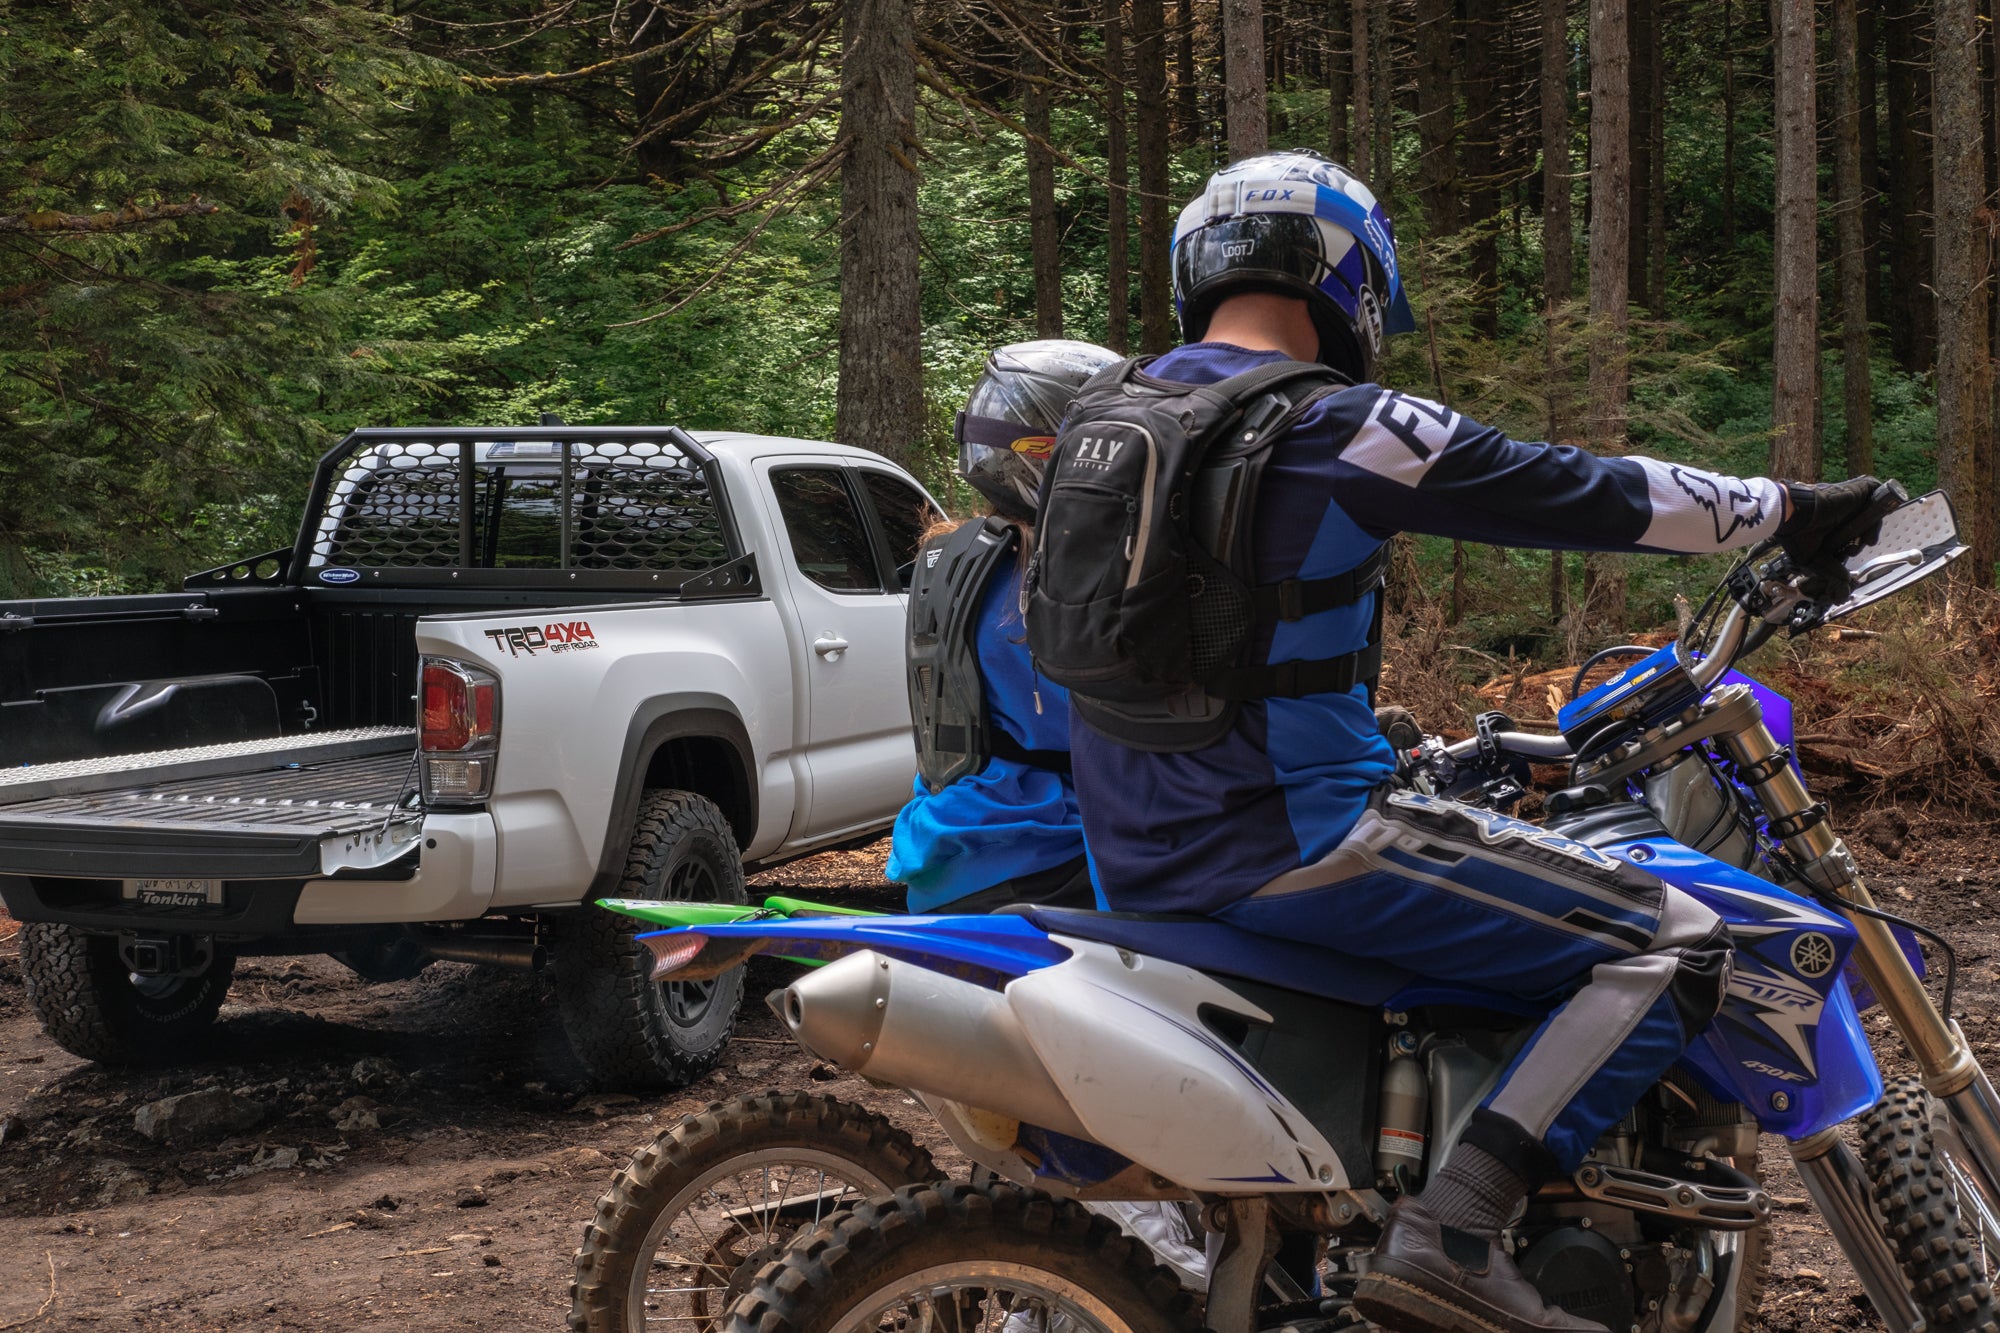 Dirtbikes with riders on them and a truck in the background with a Wickum Rack